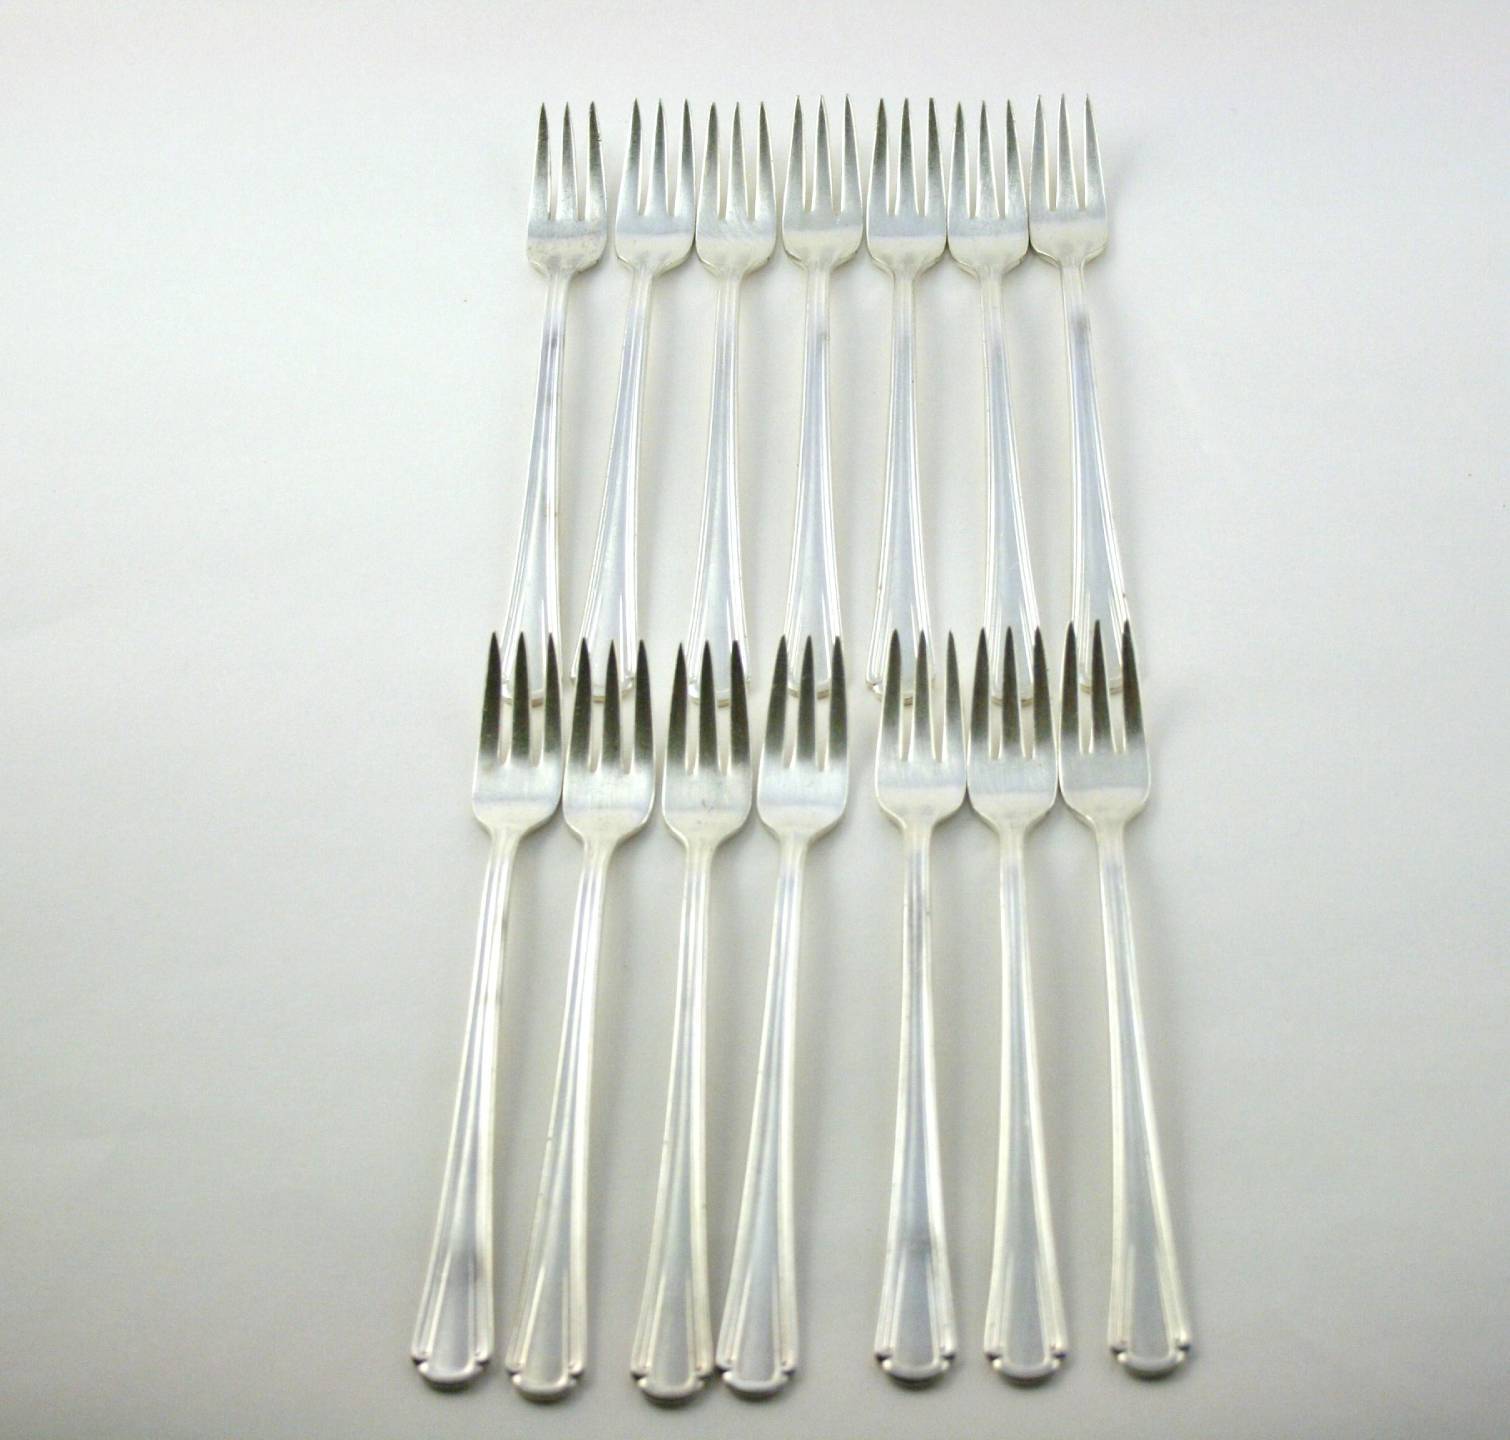 Victors Co A1 International Silverplate Cocktail Seafood Forks Set of 14   #1447 - $48.00